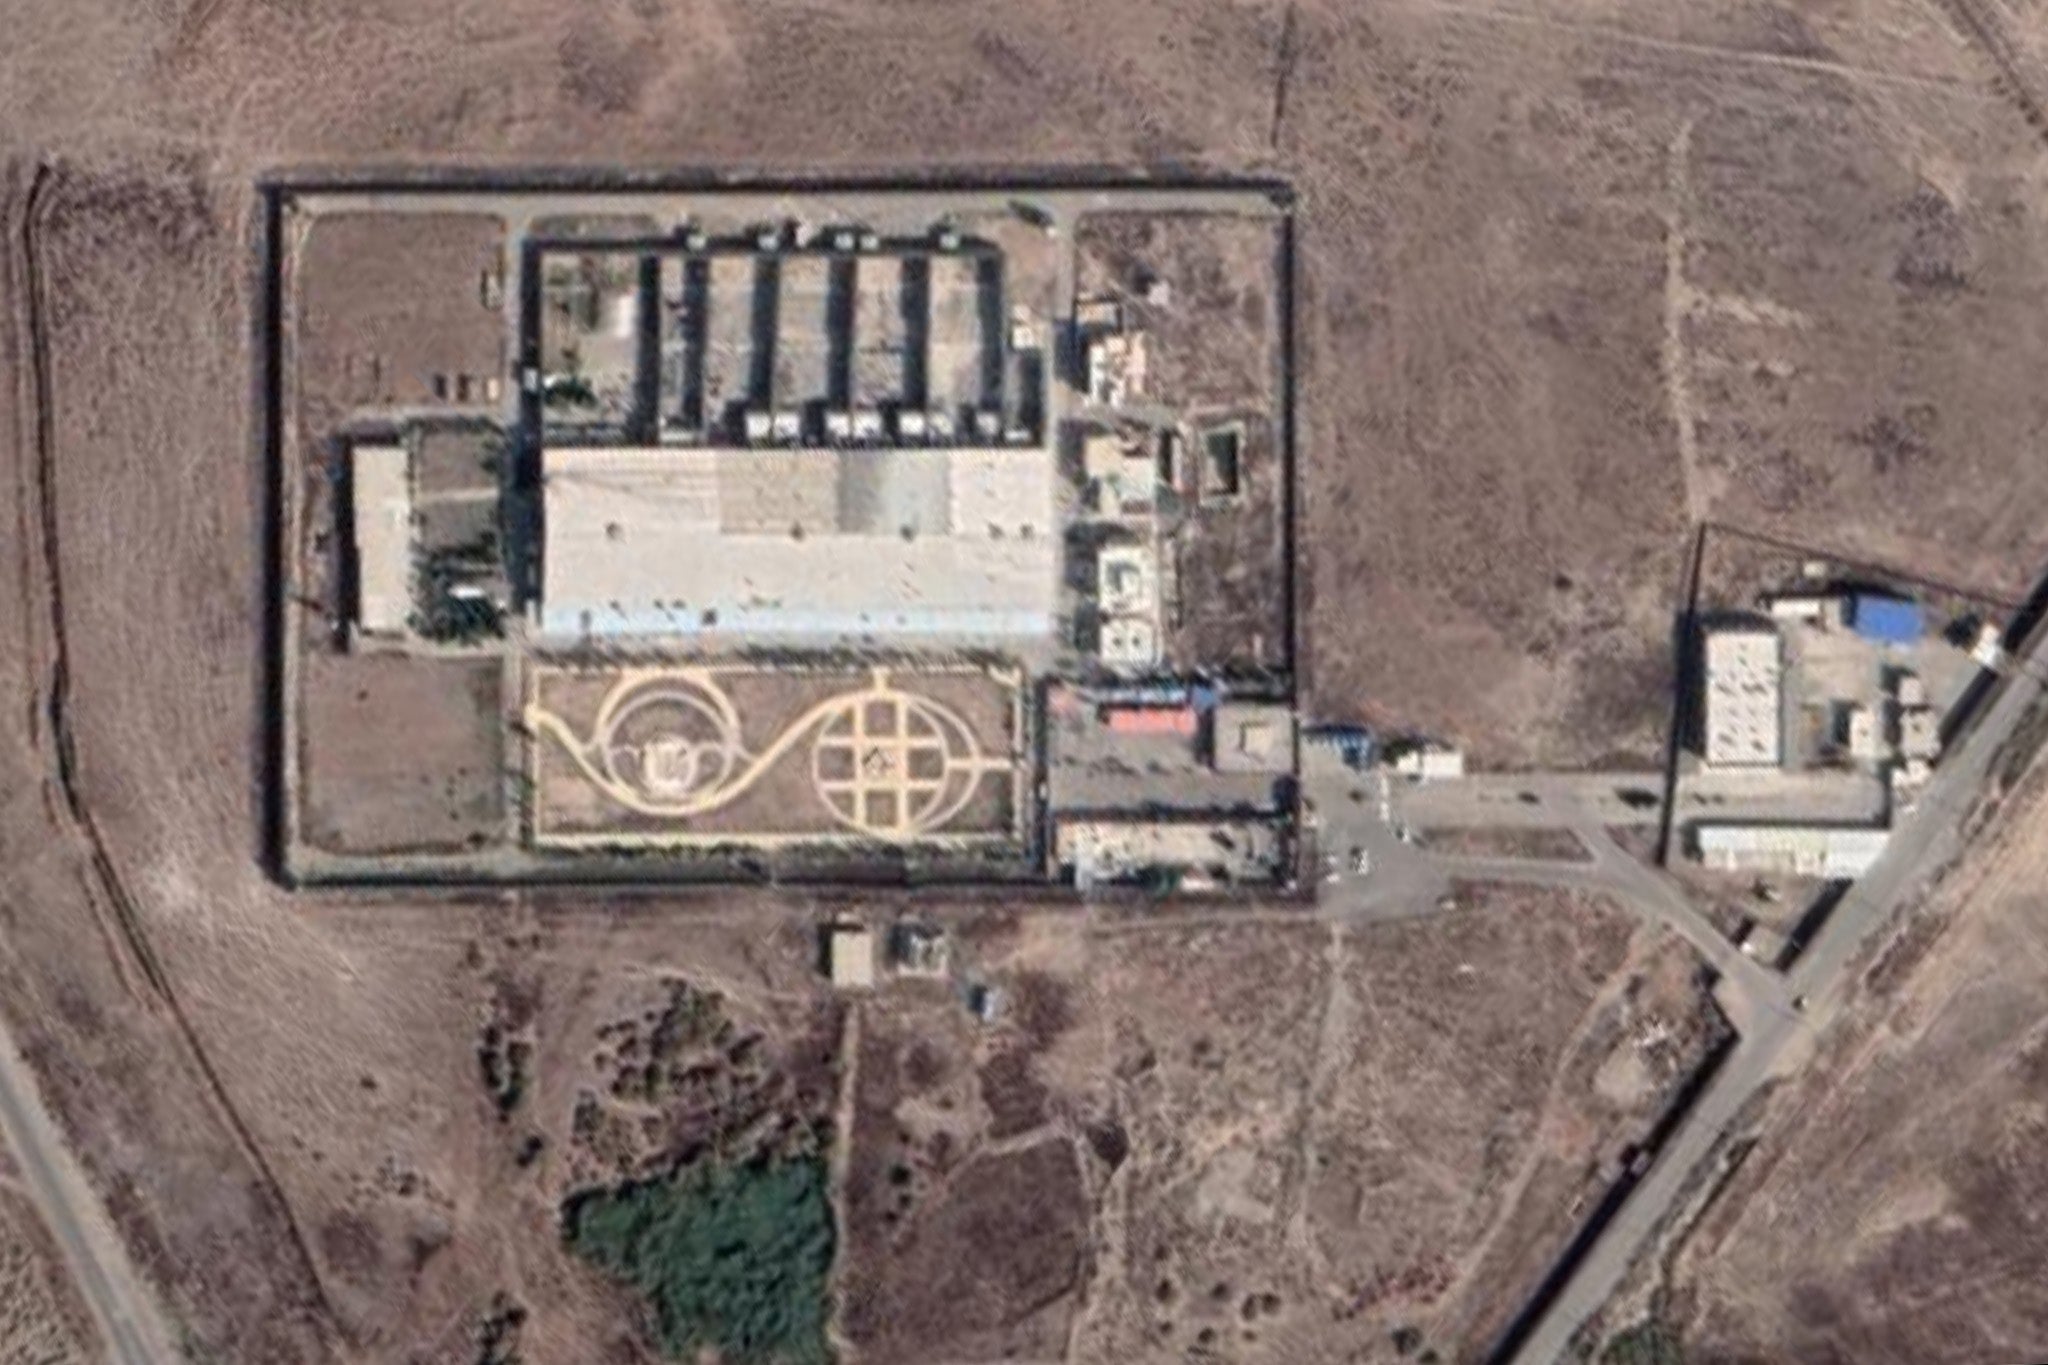 Qarchak prison is located in the desert some 30 miles outside of Tehran